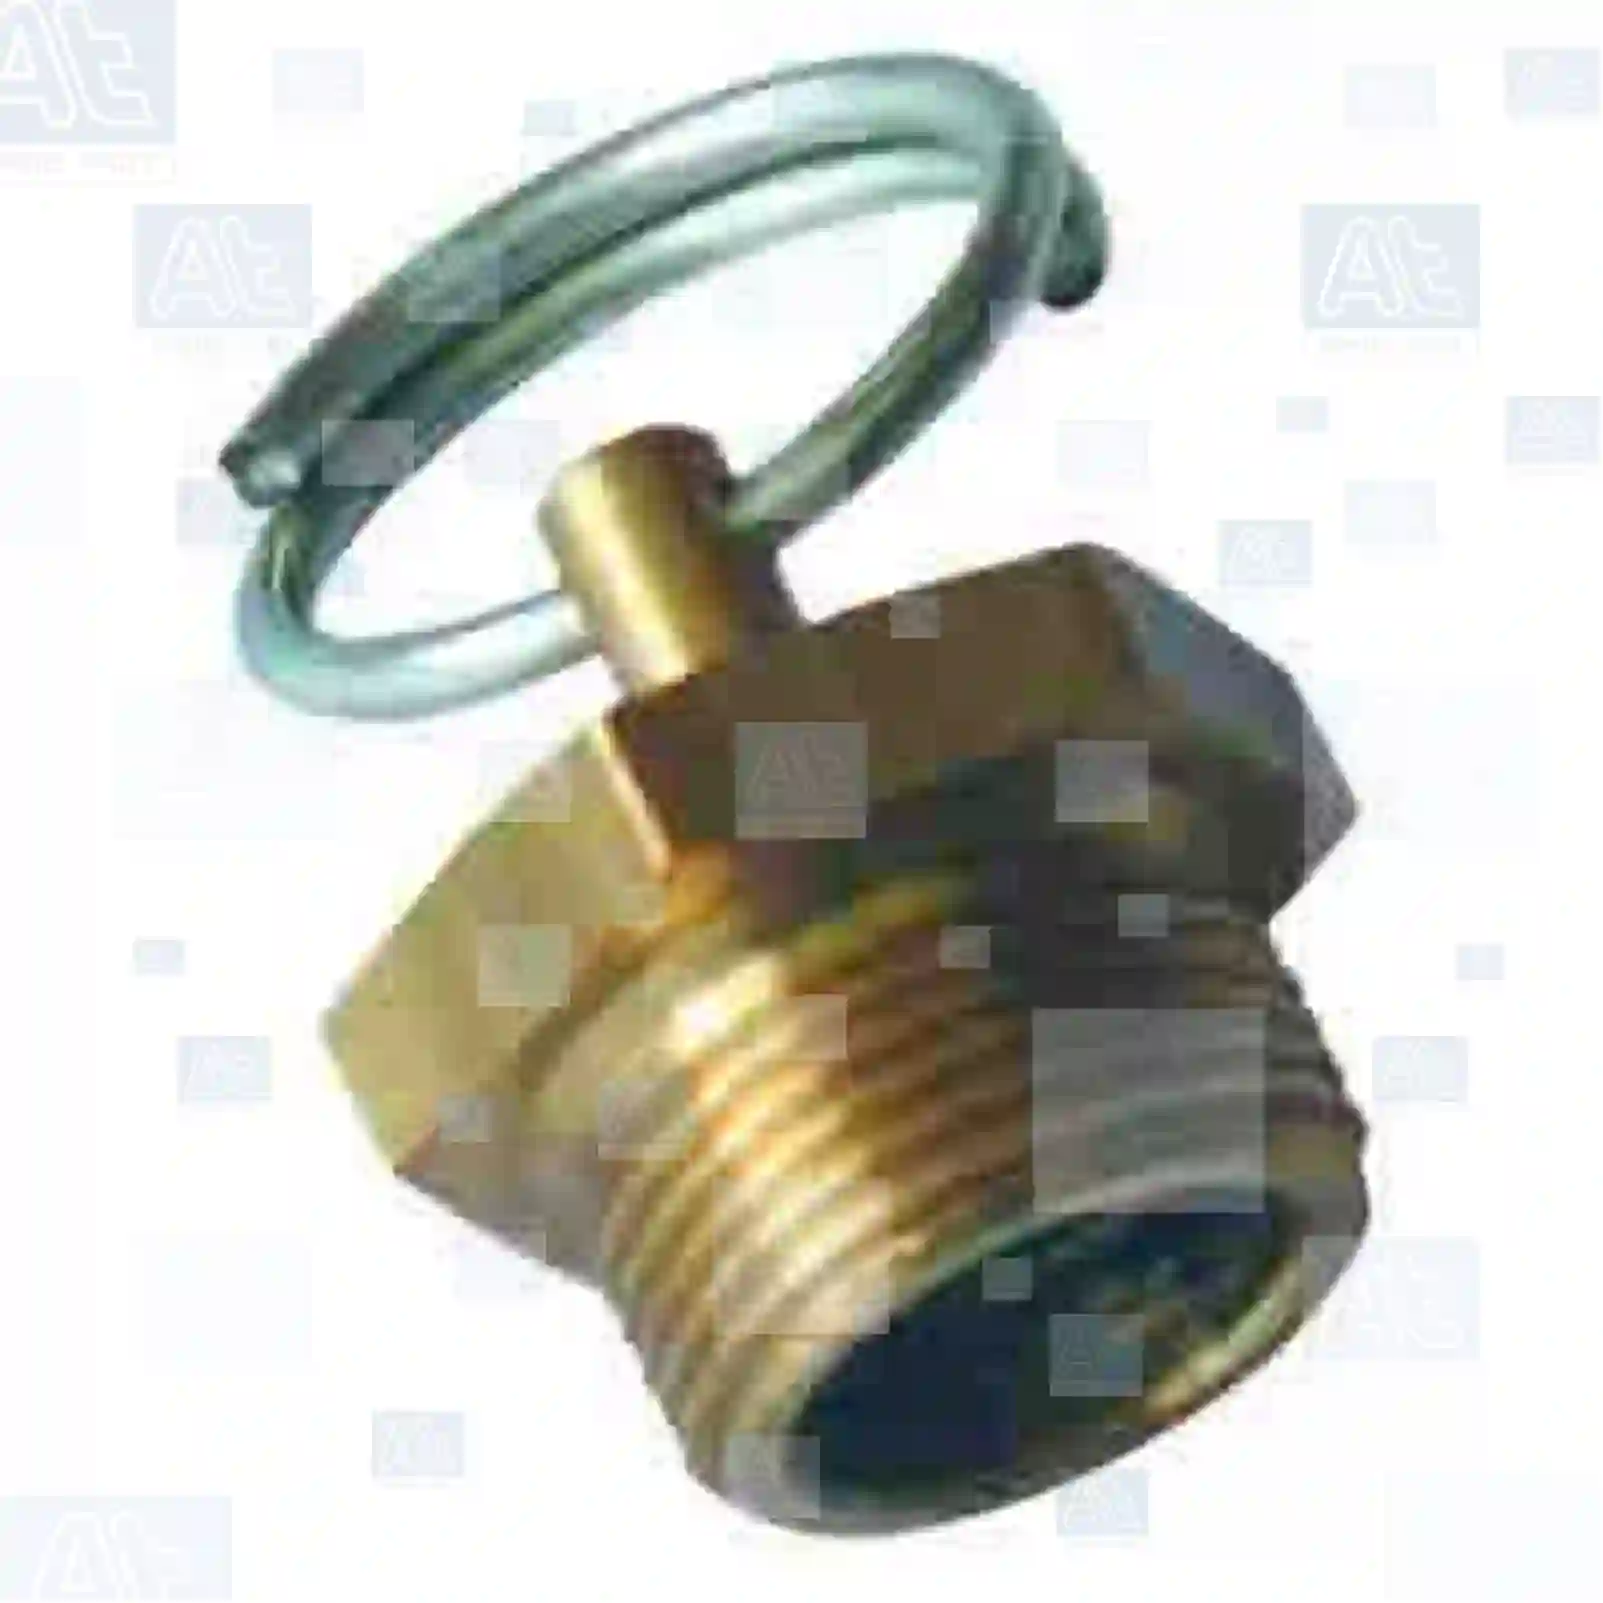 Water drain valve, 77713802, 605253000, 0201107, 0505294, 1443387, 1782075, 201107, 505294, 01260634, 02486790, 02520243, 03423526, 04457267, 04672326, 04741164, 04788568, 1260634, 2486790, 2520243, 3423526, 42021336, 4457267, 4672326, 4788568, 500304229, 61578024, 502921908, 81512605003, 81512606002, 81512606003, 81512606040, 81512606041, 81512606042, 81512607002, 81512607003, 81512607004, 90810214230, 0004311206, 0004320407, 0004320607, 0004320807, 0004321107, 0004321307, 0004321907, 0004322007, 0004322107, 0004322407, 3454300281, 110267400, 495129, AIFO843, 0110701400, 4425003400, 124404, 1382866, 1403463, 295499, 295500, 303501, 606639, 341425, 6626859, 795035, ZG50843-0008 ||  77713802 At Spare Part | Engine, Accelerator Pedal, Camshaft, Connecting Rod, Crankcase, Crankshaft, Cylinder Head, Engine Suspension Mountings, Exhaust Manifold, Exhaust Gas Recirculation, Filter Kits, Flywheel Housing, General Overhaul Kits, Engine, Intake Manifold, Oil Cleaner, Oil Cooler, Oil Filter, Oil Pump, Oil Sump, Piston & Liner, Sensor & Switch, Timing Case, Turbocharger, Cooling System, Belt Tensioner, Coolant Filter, Coolant Pipe, Corrosion Prevention Agent, Drive, Expansion Tank, Fan, Intercooler, Monitors & Gauges, Radiator, Thermostat, V-Belt / Timing belt, Water Pump, Fuel System, Electronical Injector Unit, Feed Pump, Fuel Filter, cpl., Fuel Gauge Sender,  Fuel Line, Fuel Pump, Fuel Tank, Injection Line Kit, Injection Pump, Exhaust System, Clutch & Pedal, Gearbox, Propeller Shaft, Axles, Brake System, Hubs & Wheels, Suspension, Leaf Spring, Universal Parts / Accessories, Steering, Electrical System, Cabin Water drain valve, 77713802, 605253000, 0201107, 0505294, 1443387, 1782075, 201107, 505294, 01260634, 02486790, 02520243, 03423526, 04457267, 04672326, 04741164, 04788568, 1260634, 2486790, 2520243, 3423526, 42021336, 4457267, 4672326, 4788568, 500304229, 61578024, 502921908, 81512605003, 81512606002, 81512606003, 81512606040, 81512606041, 81512606042, 81512607002, 81512607003, 81512607004, 90810214230, 0004311206, 0004320407, 0004320607, 0004320807, 0004321107, 0004321307, 0004321907, 0004322007, 0004322107, 0004322407, 3454300281, 110267400, 495129, AIFO843, 0110701400, 4425003400, 124404, 1382866, 1403463, 295499, 295500, 303501, 606639, 341425, 6626859, 795035, ZG50843-0008 ||  77713802 At Spare Part | Engine, Accelerator Pedal, Camshaft, Connecting Rod, Crankcase, Crankshaft, Cylinder Head, Engine Suspension Mountings, Exhaust Manifold, Exhaust Gas Recirculation, Filter Kits, Flywheel Housing, General Overhaul Kits, Engine, Intake Manifold, Oil Cleaner, Oil Cooler, Oil Filter, Oil Pump, Oil Sump, Piston & Liner, Sensor & Switch, Timing Case, Turbocharger, Cooling System, Belt Tensioner, Coolant Filter, Coolant Pipe, Corrosion Prevention Agent, Drive, Expansion Tank, Fan, Intercooler, Monitors & Gauges, Radiator, Thermostat, V-Belt / Timing belt, Water Pump, Fuel System, Electronical Injector Unit, Feed Pump, Fuel Filter, cpl., Fuel Gauge Sender,  Fuel Line, Fuel Pump, Fuel Tank, Injection Line Kit, Injection Pump, Exhaust System, Clutch & Pedal, Gearbox, Propeller Shaft, Axles, Brake System, Hubs & Wheels, Suspension, Leaf Spring, Universal Parts / Accessories, Steering, Electrical System, Cabin